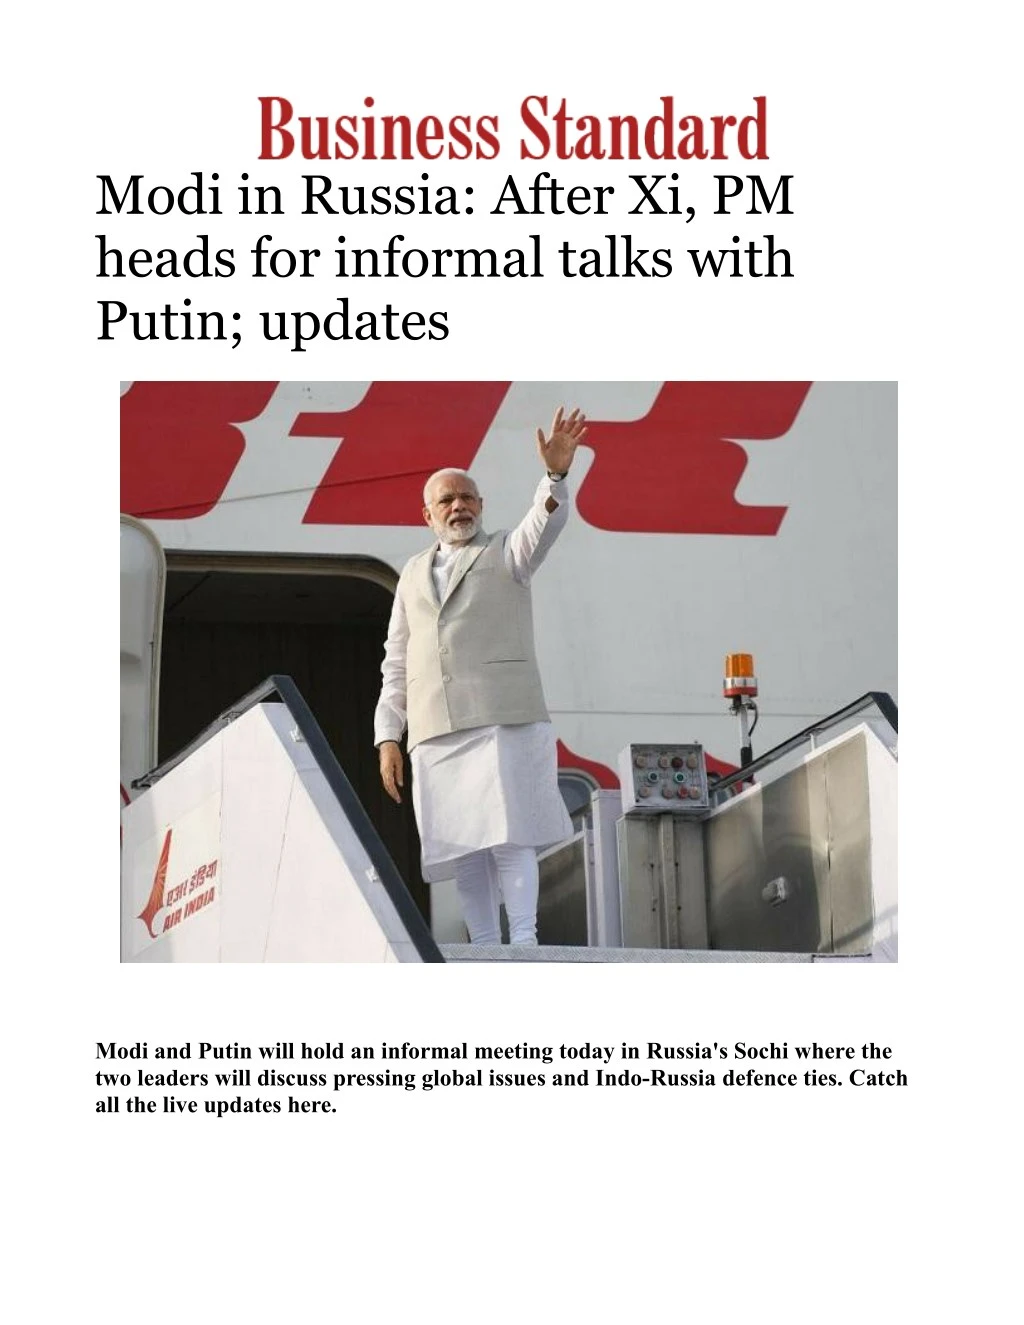 modi in russia after xi pm heads for informal